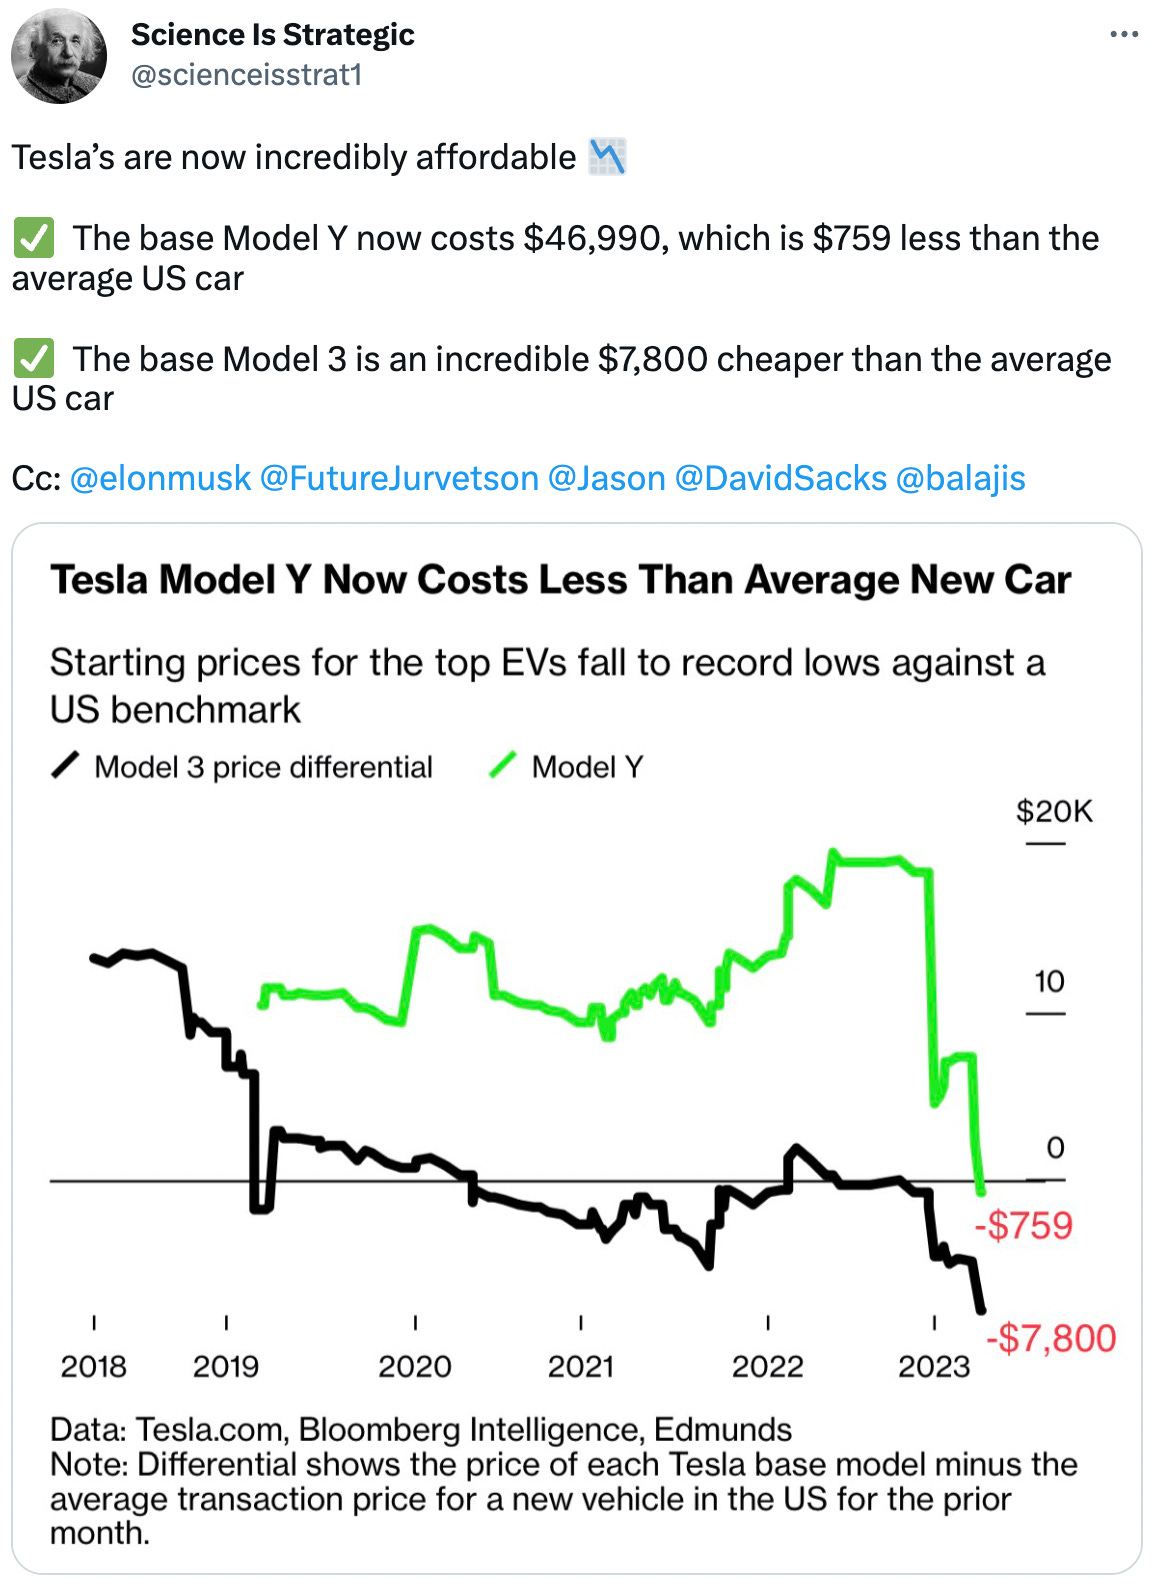  See new Tweets Conversation Science Is Strategic @scienceisstrat1 Tesla’s are now incredibly affordable 📉   ✅  The base Model Y now costs $46,990, which is $759 less than the average US car  ✅  The base Model 3 is an incredible $7,800 cheaper than the average US car  Cc:  @elonmusk   @FutureJurvetson   @Jason   @DavidSacks   @balajis